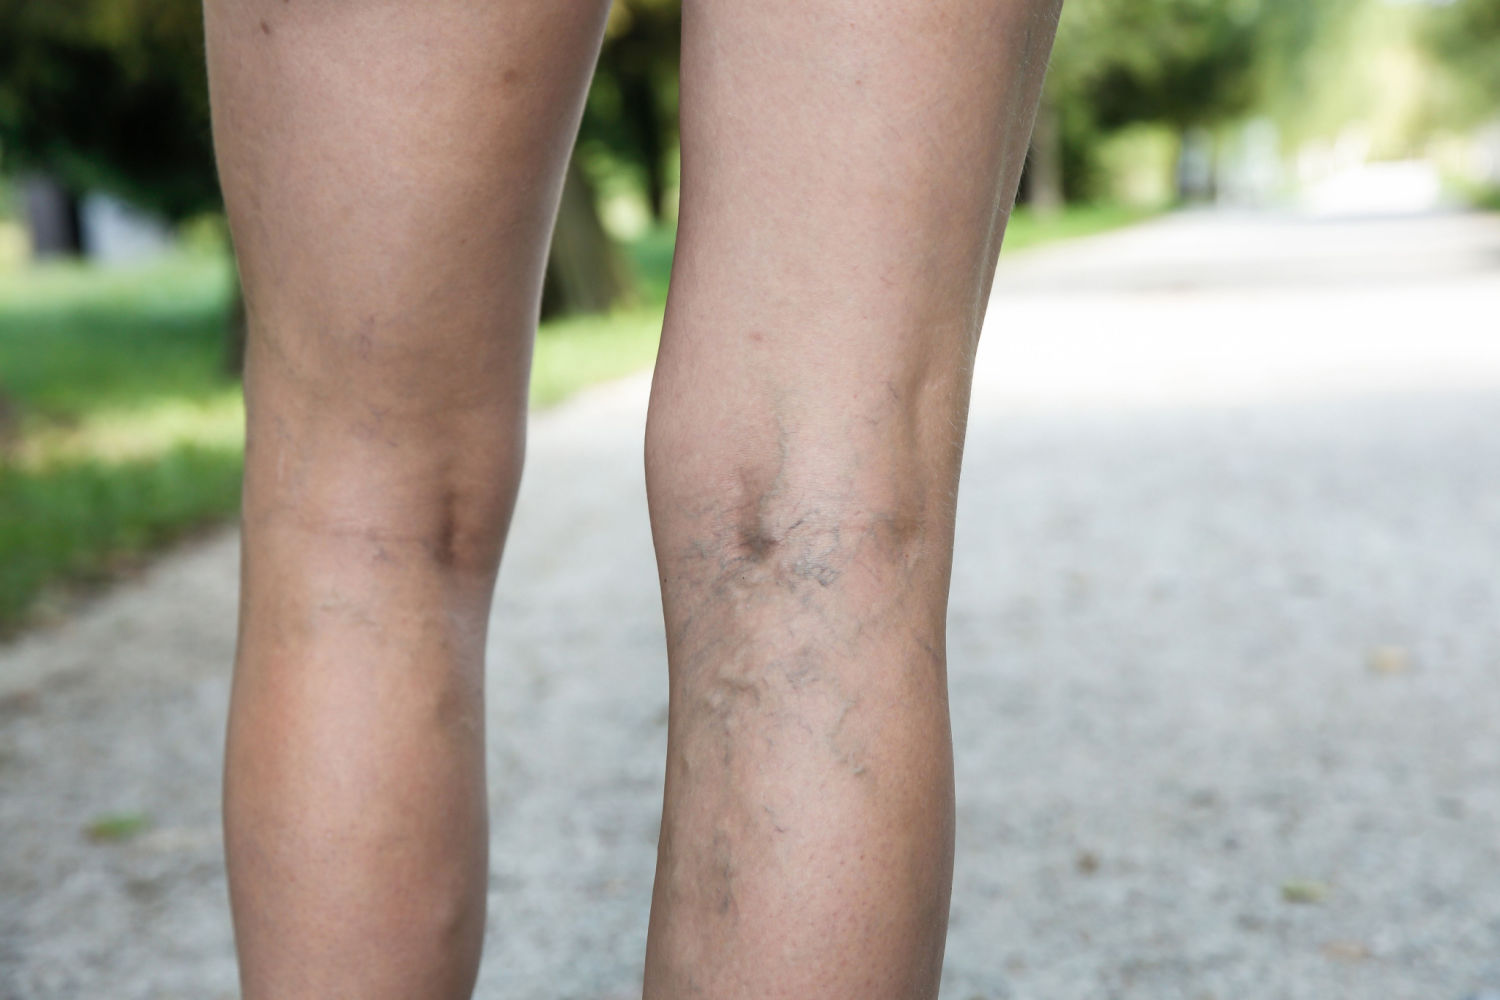 varicose veins on the back of a woman's legs, outside in a park on a walking path in Michigan